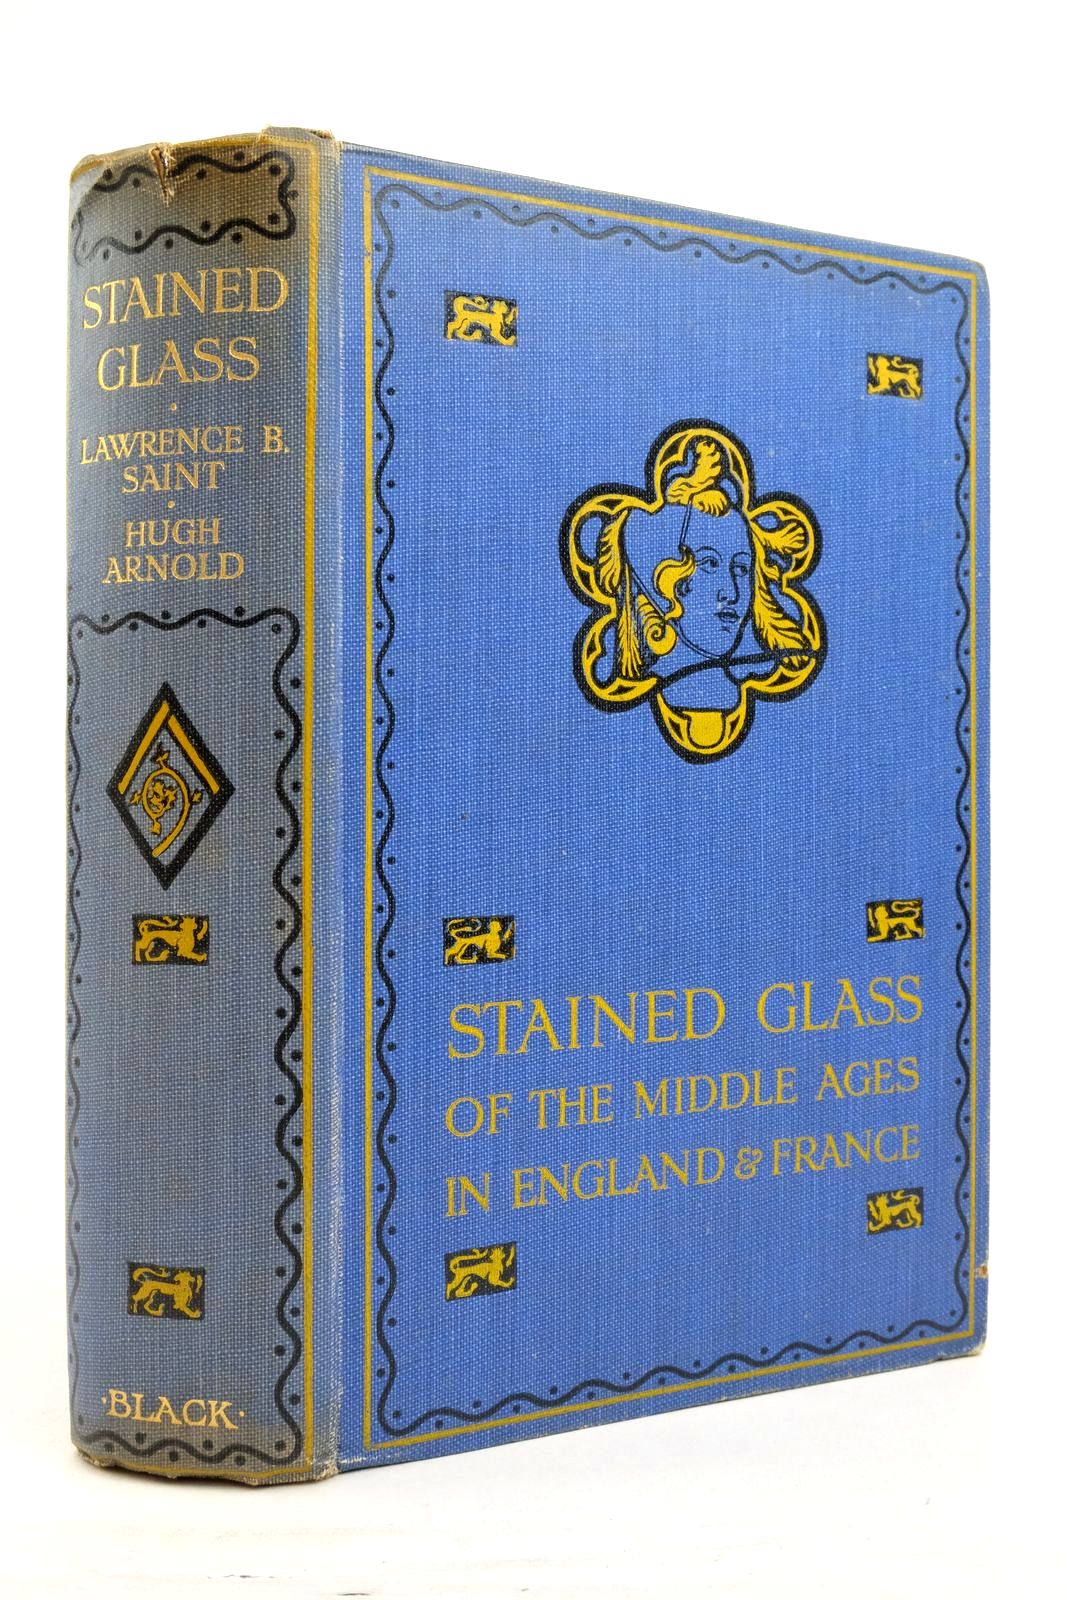 Photo of STAINED GLASS OF THE MIDDLE AGES IN ENGLAND AND FRANCE written by Arnold, Hugh illustrated by Saint, Lawrence B. published by A. &amp; C. Black Ltd. (STOCK CODE: 2136954)  for sale by Stella & Rose's Books